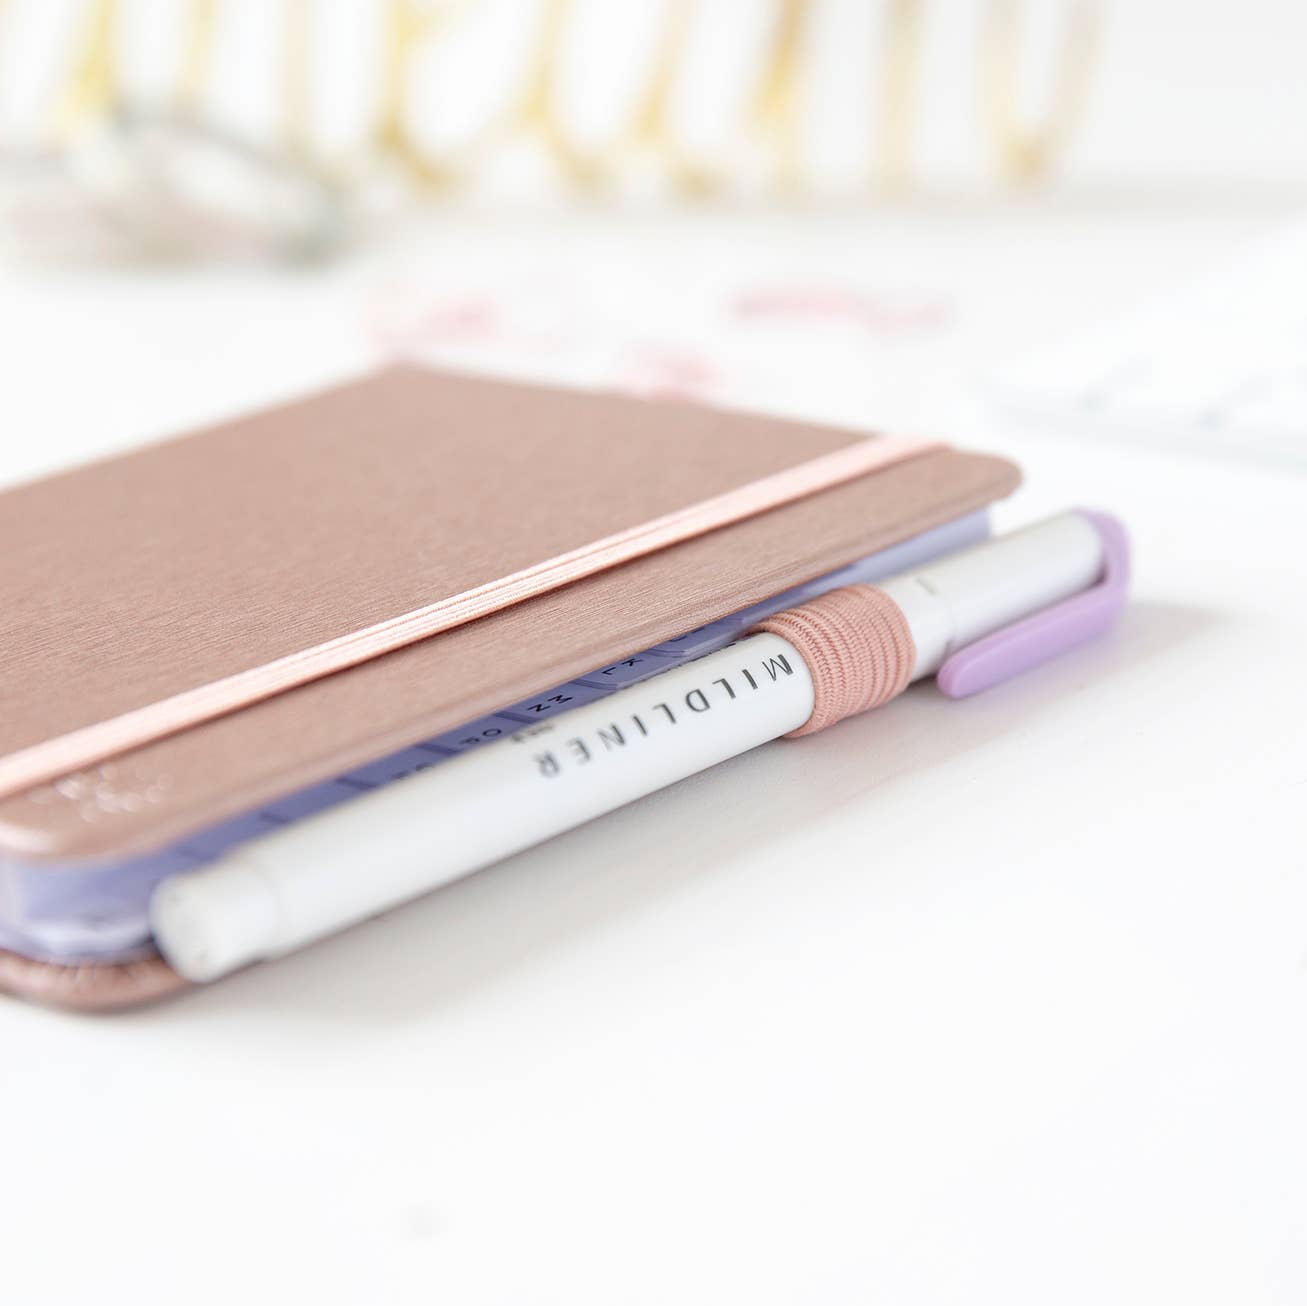 Rose Gold Password Logbook Core bloom daily planners